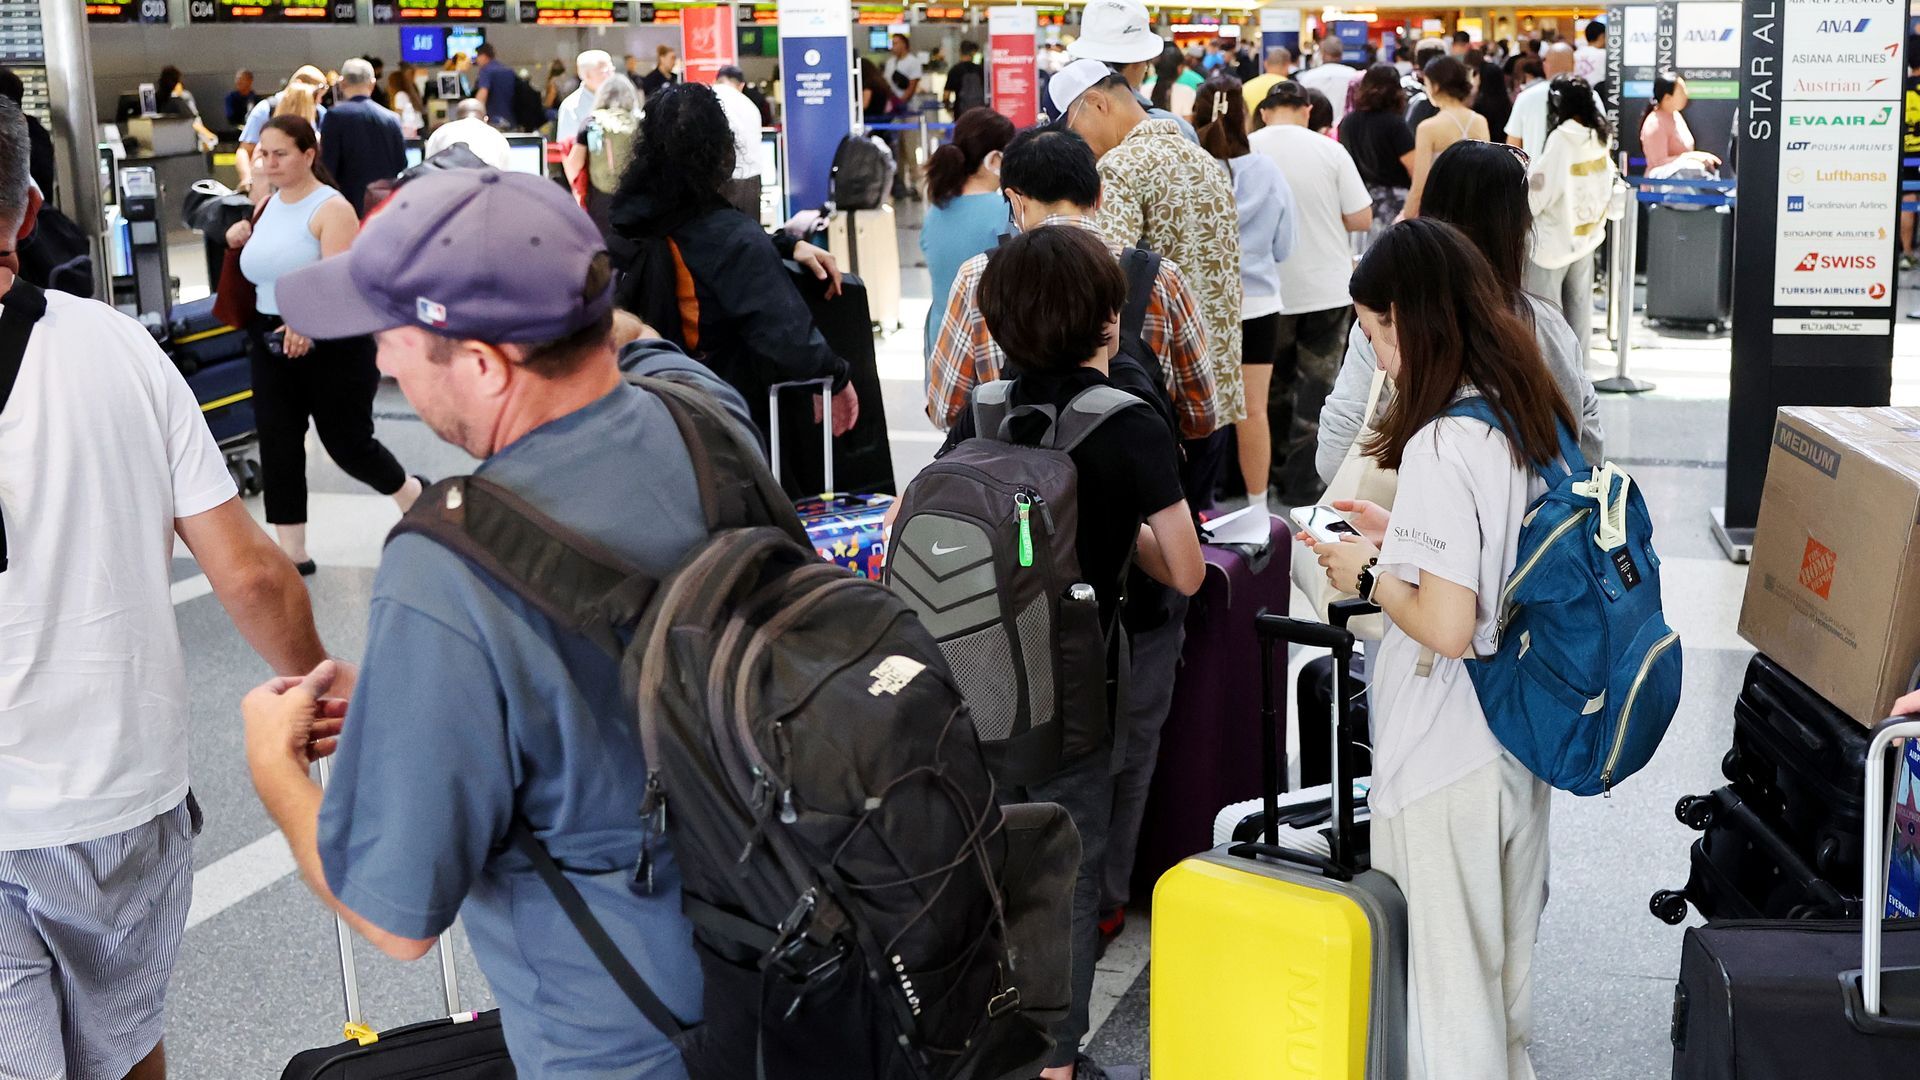 The TSA screened a record number of passengers on June 23, and it expects the surge to continue through the July 4 holiday period.